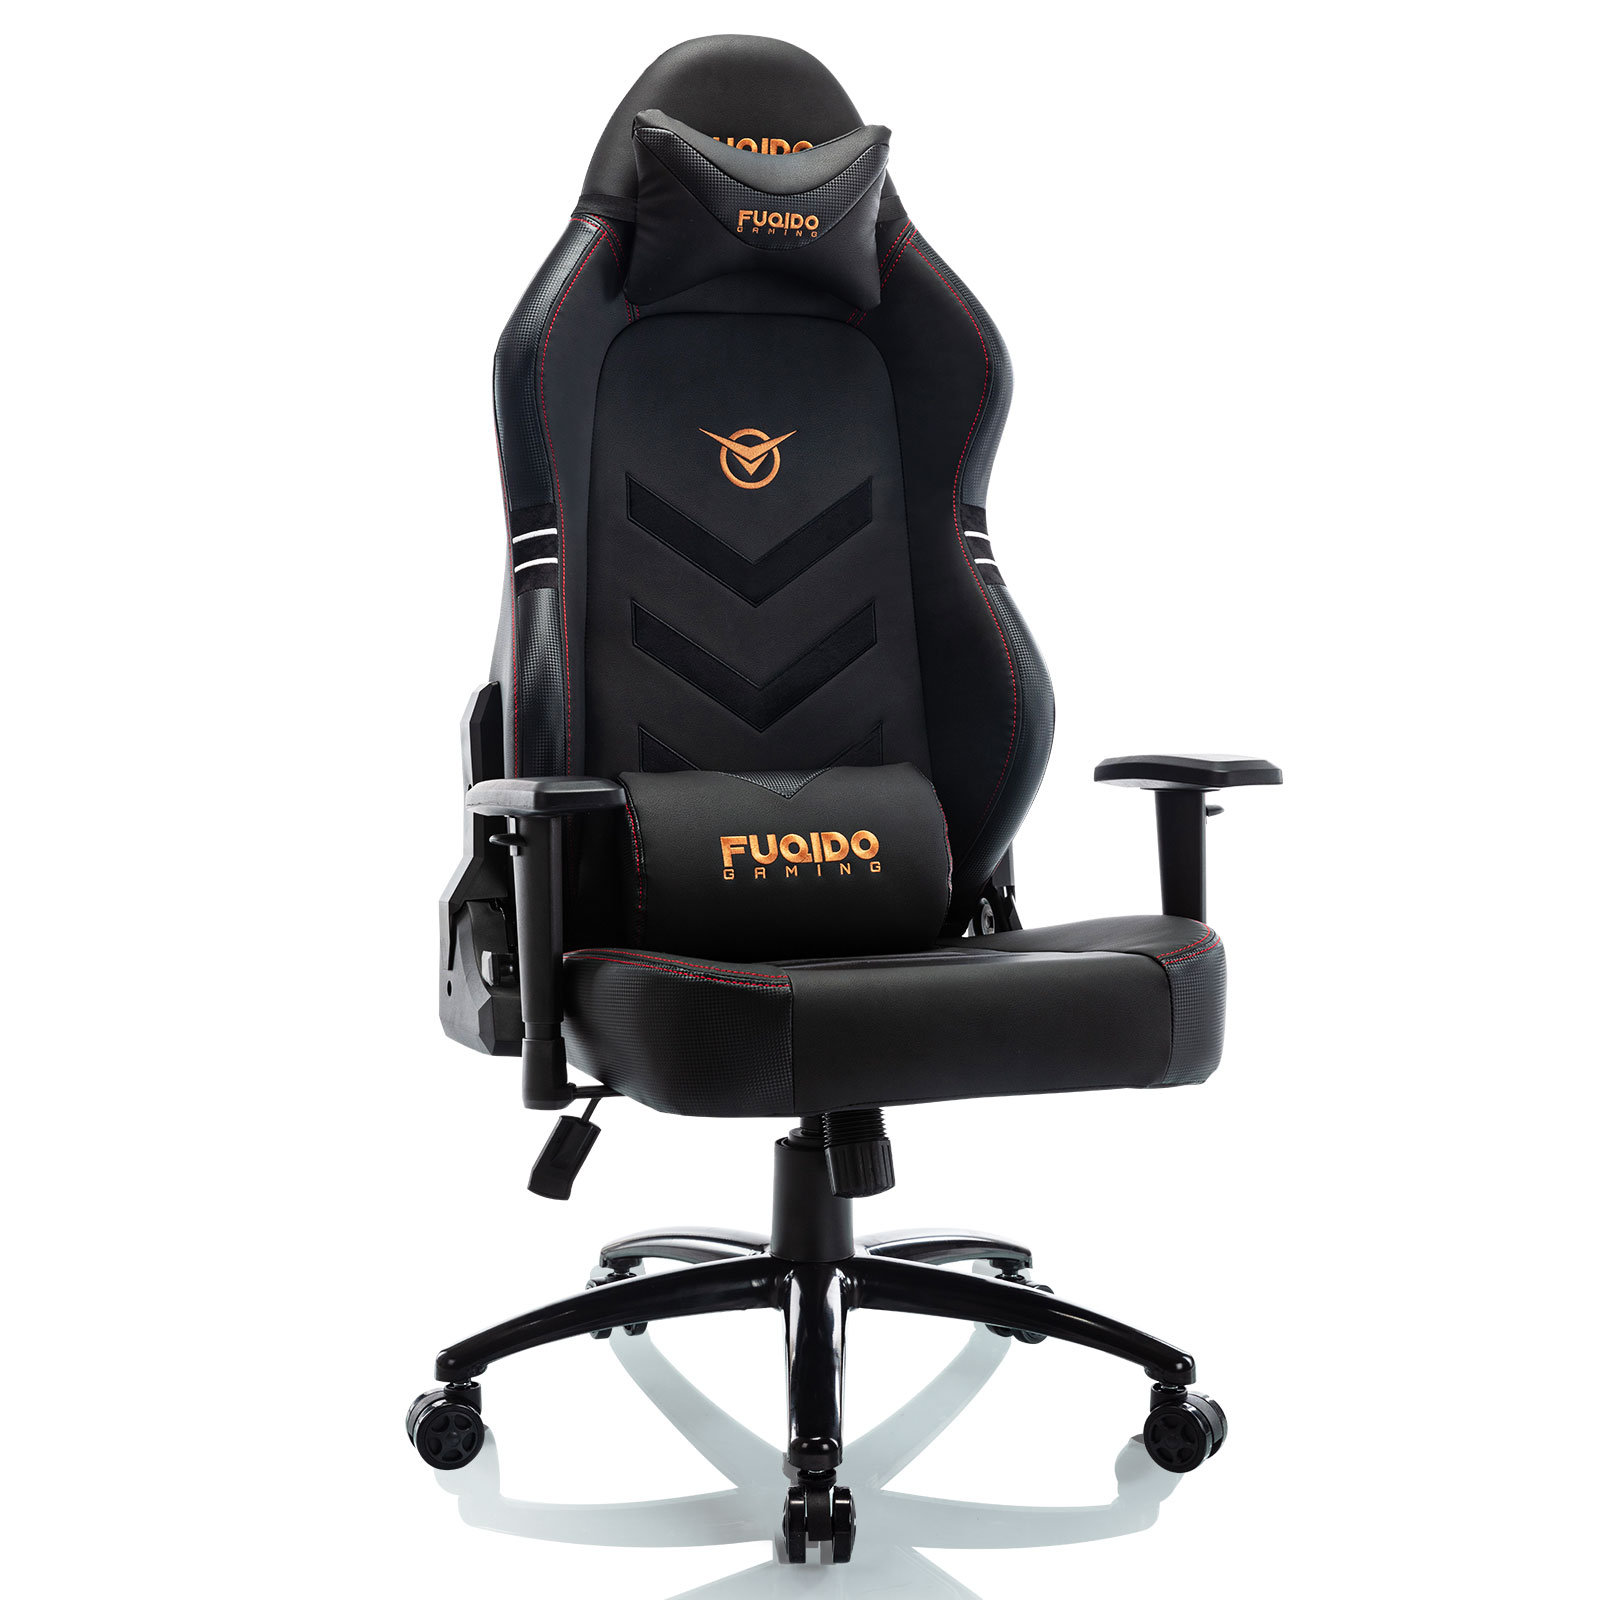 Adjustable Armrest and Backrest Sufficient Sponge Filling Sturdy Iron Frame Structure Free Headrest and Cushion INTEY Gaming Chair Office Chair 360° Rotation and 160° Recline 